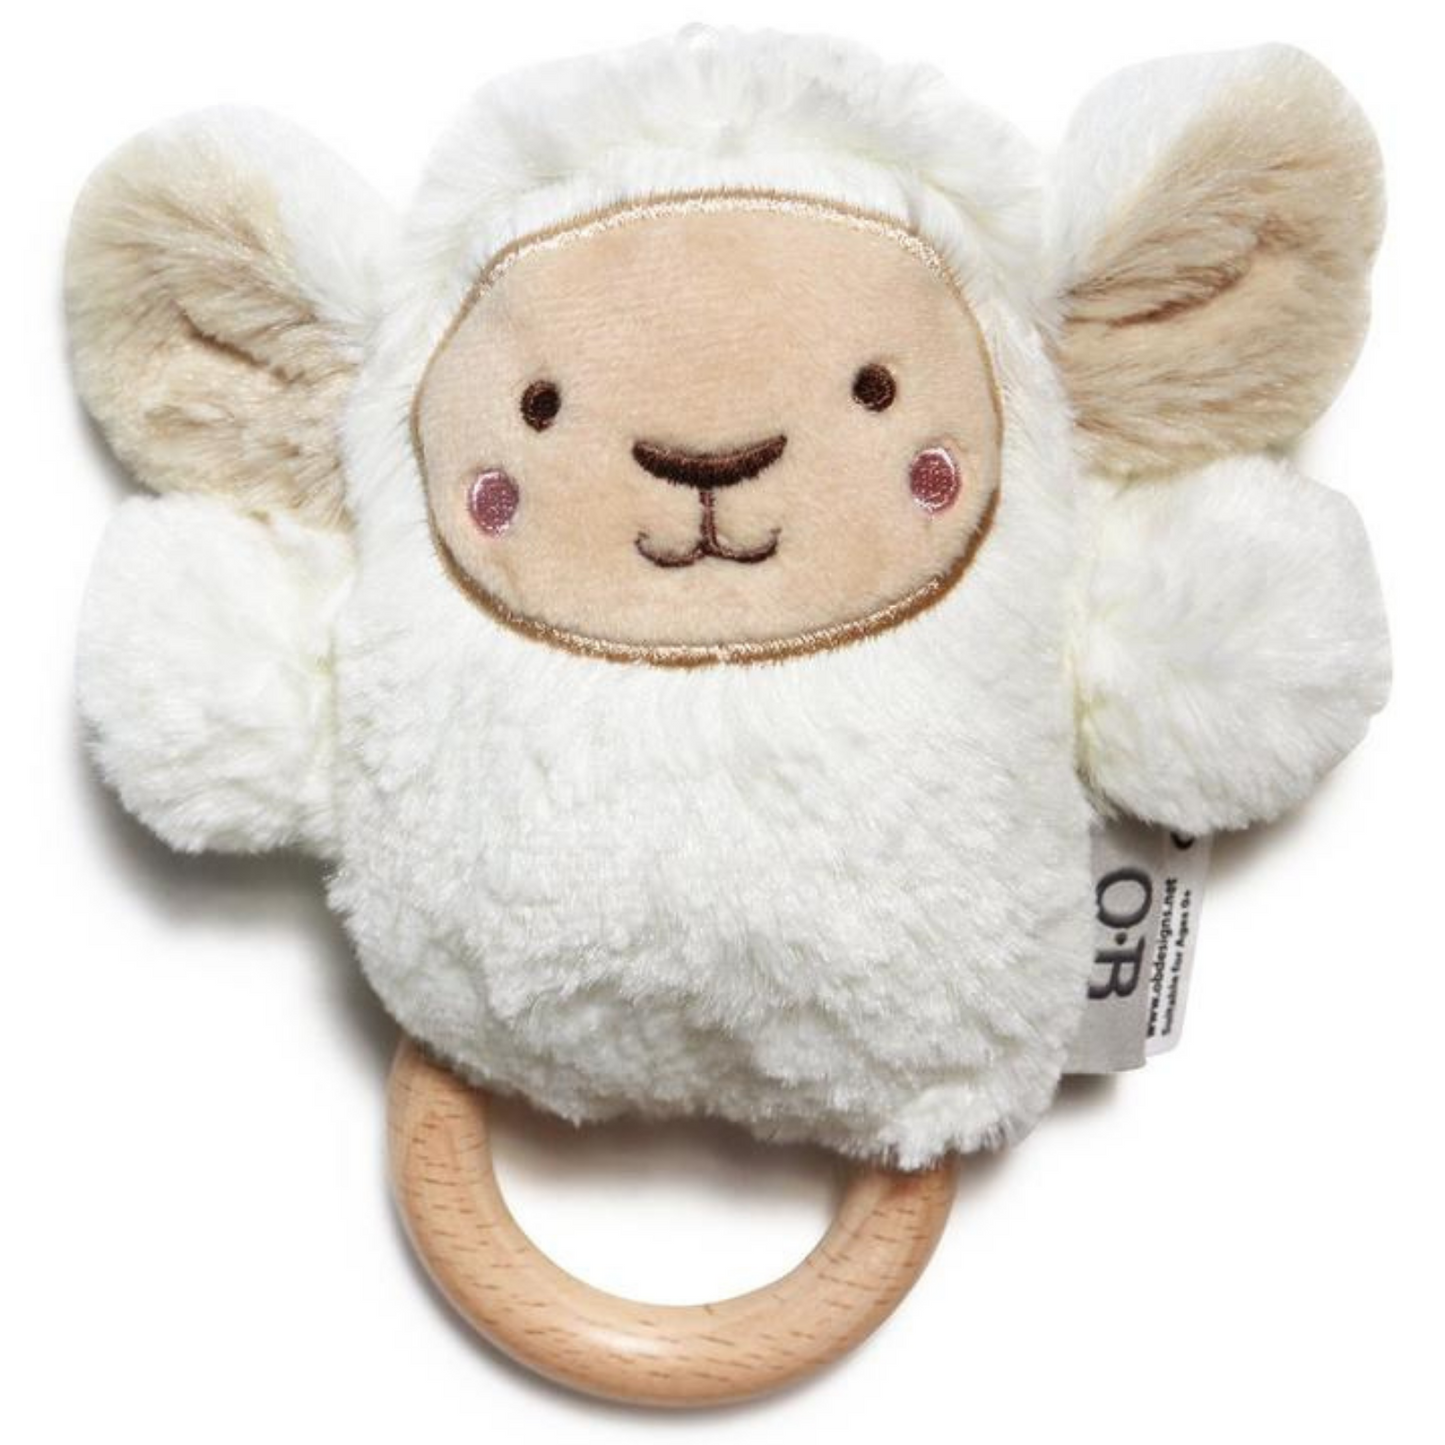 Lee Lamb Rattle Teether Toy